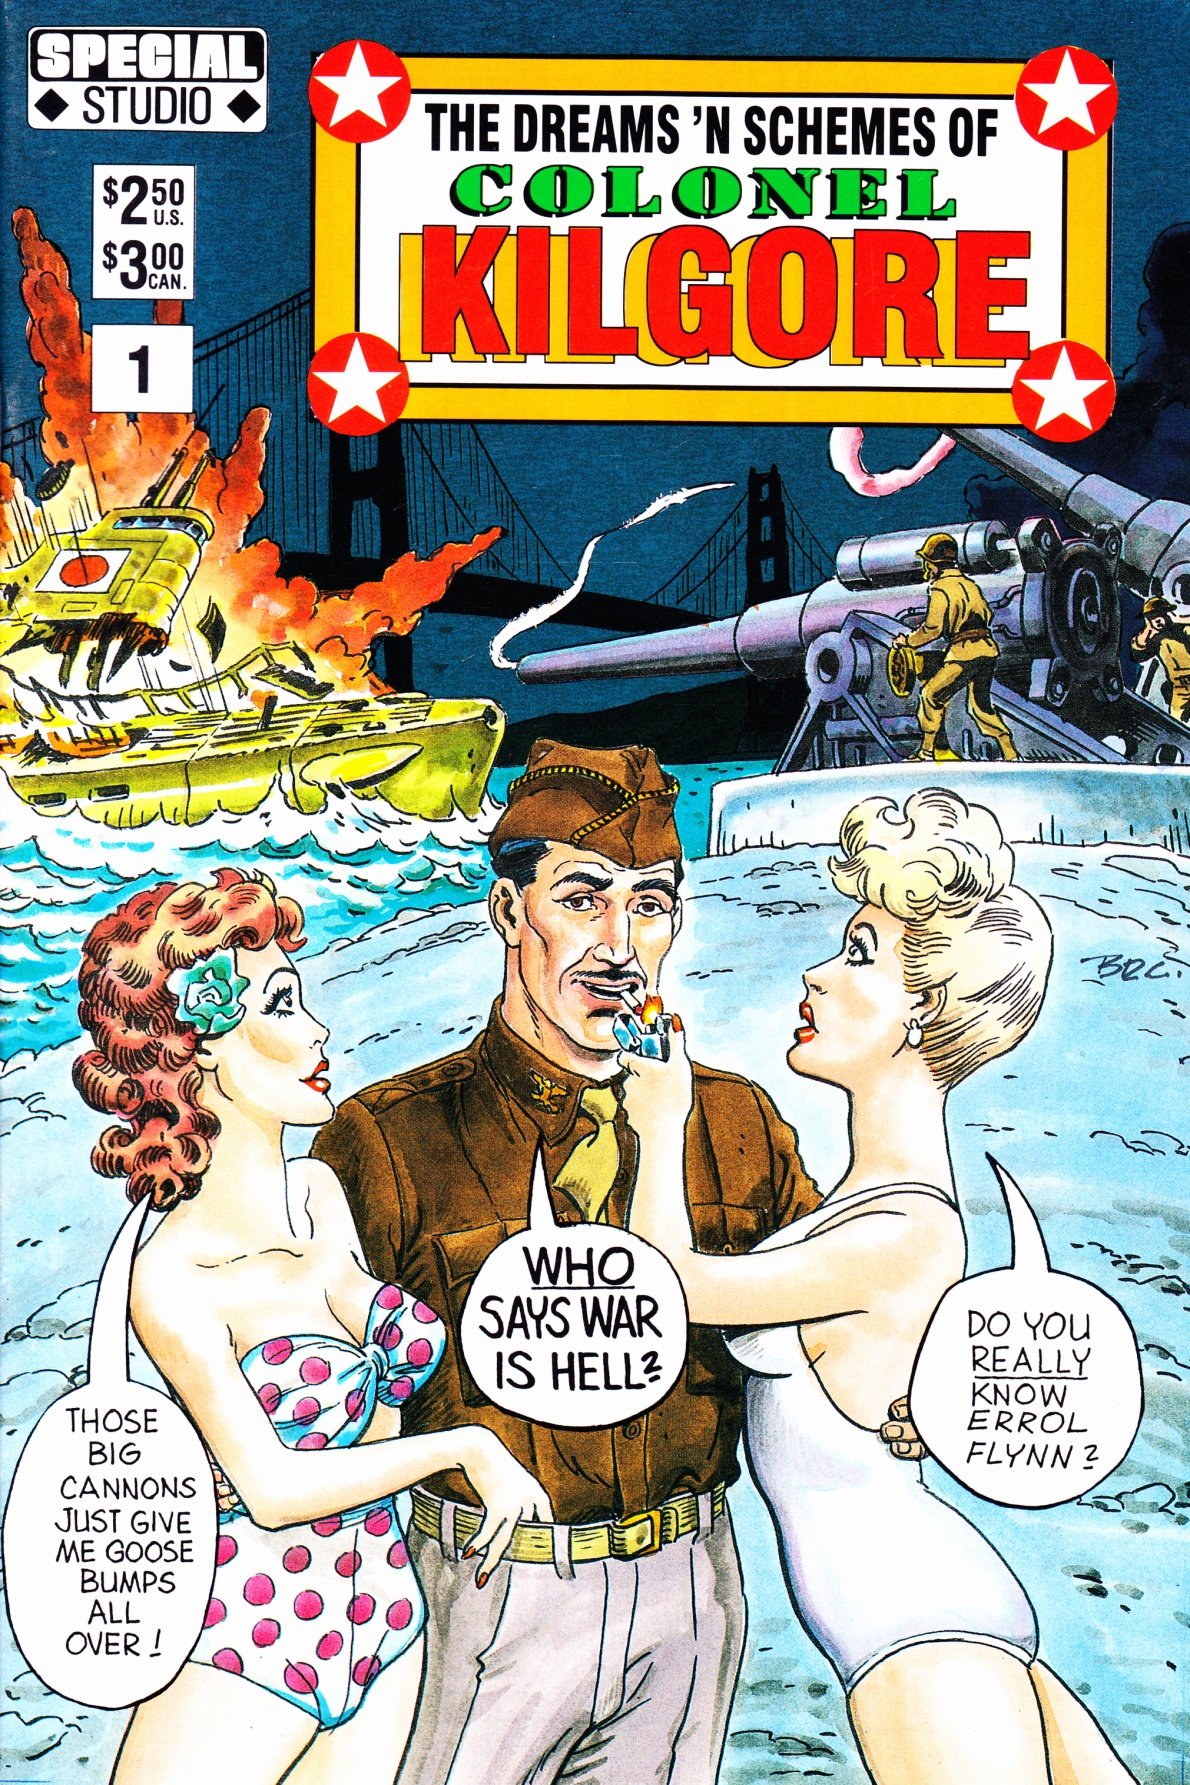 C:\Users\Robert\Documents\CARTOONING ILLUSTRATION ANIMATION\IMAGE COMIC BOOK COVERS\DREAMS 'N SCHEMES OF COLONEL KILGORE, fc.jpg